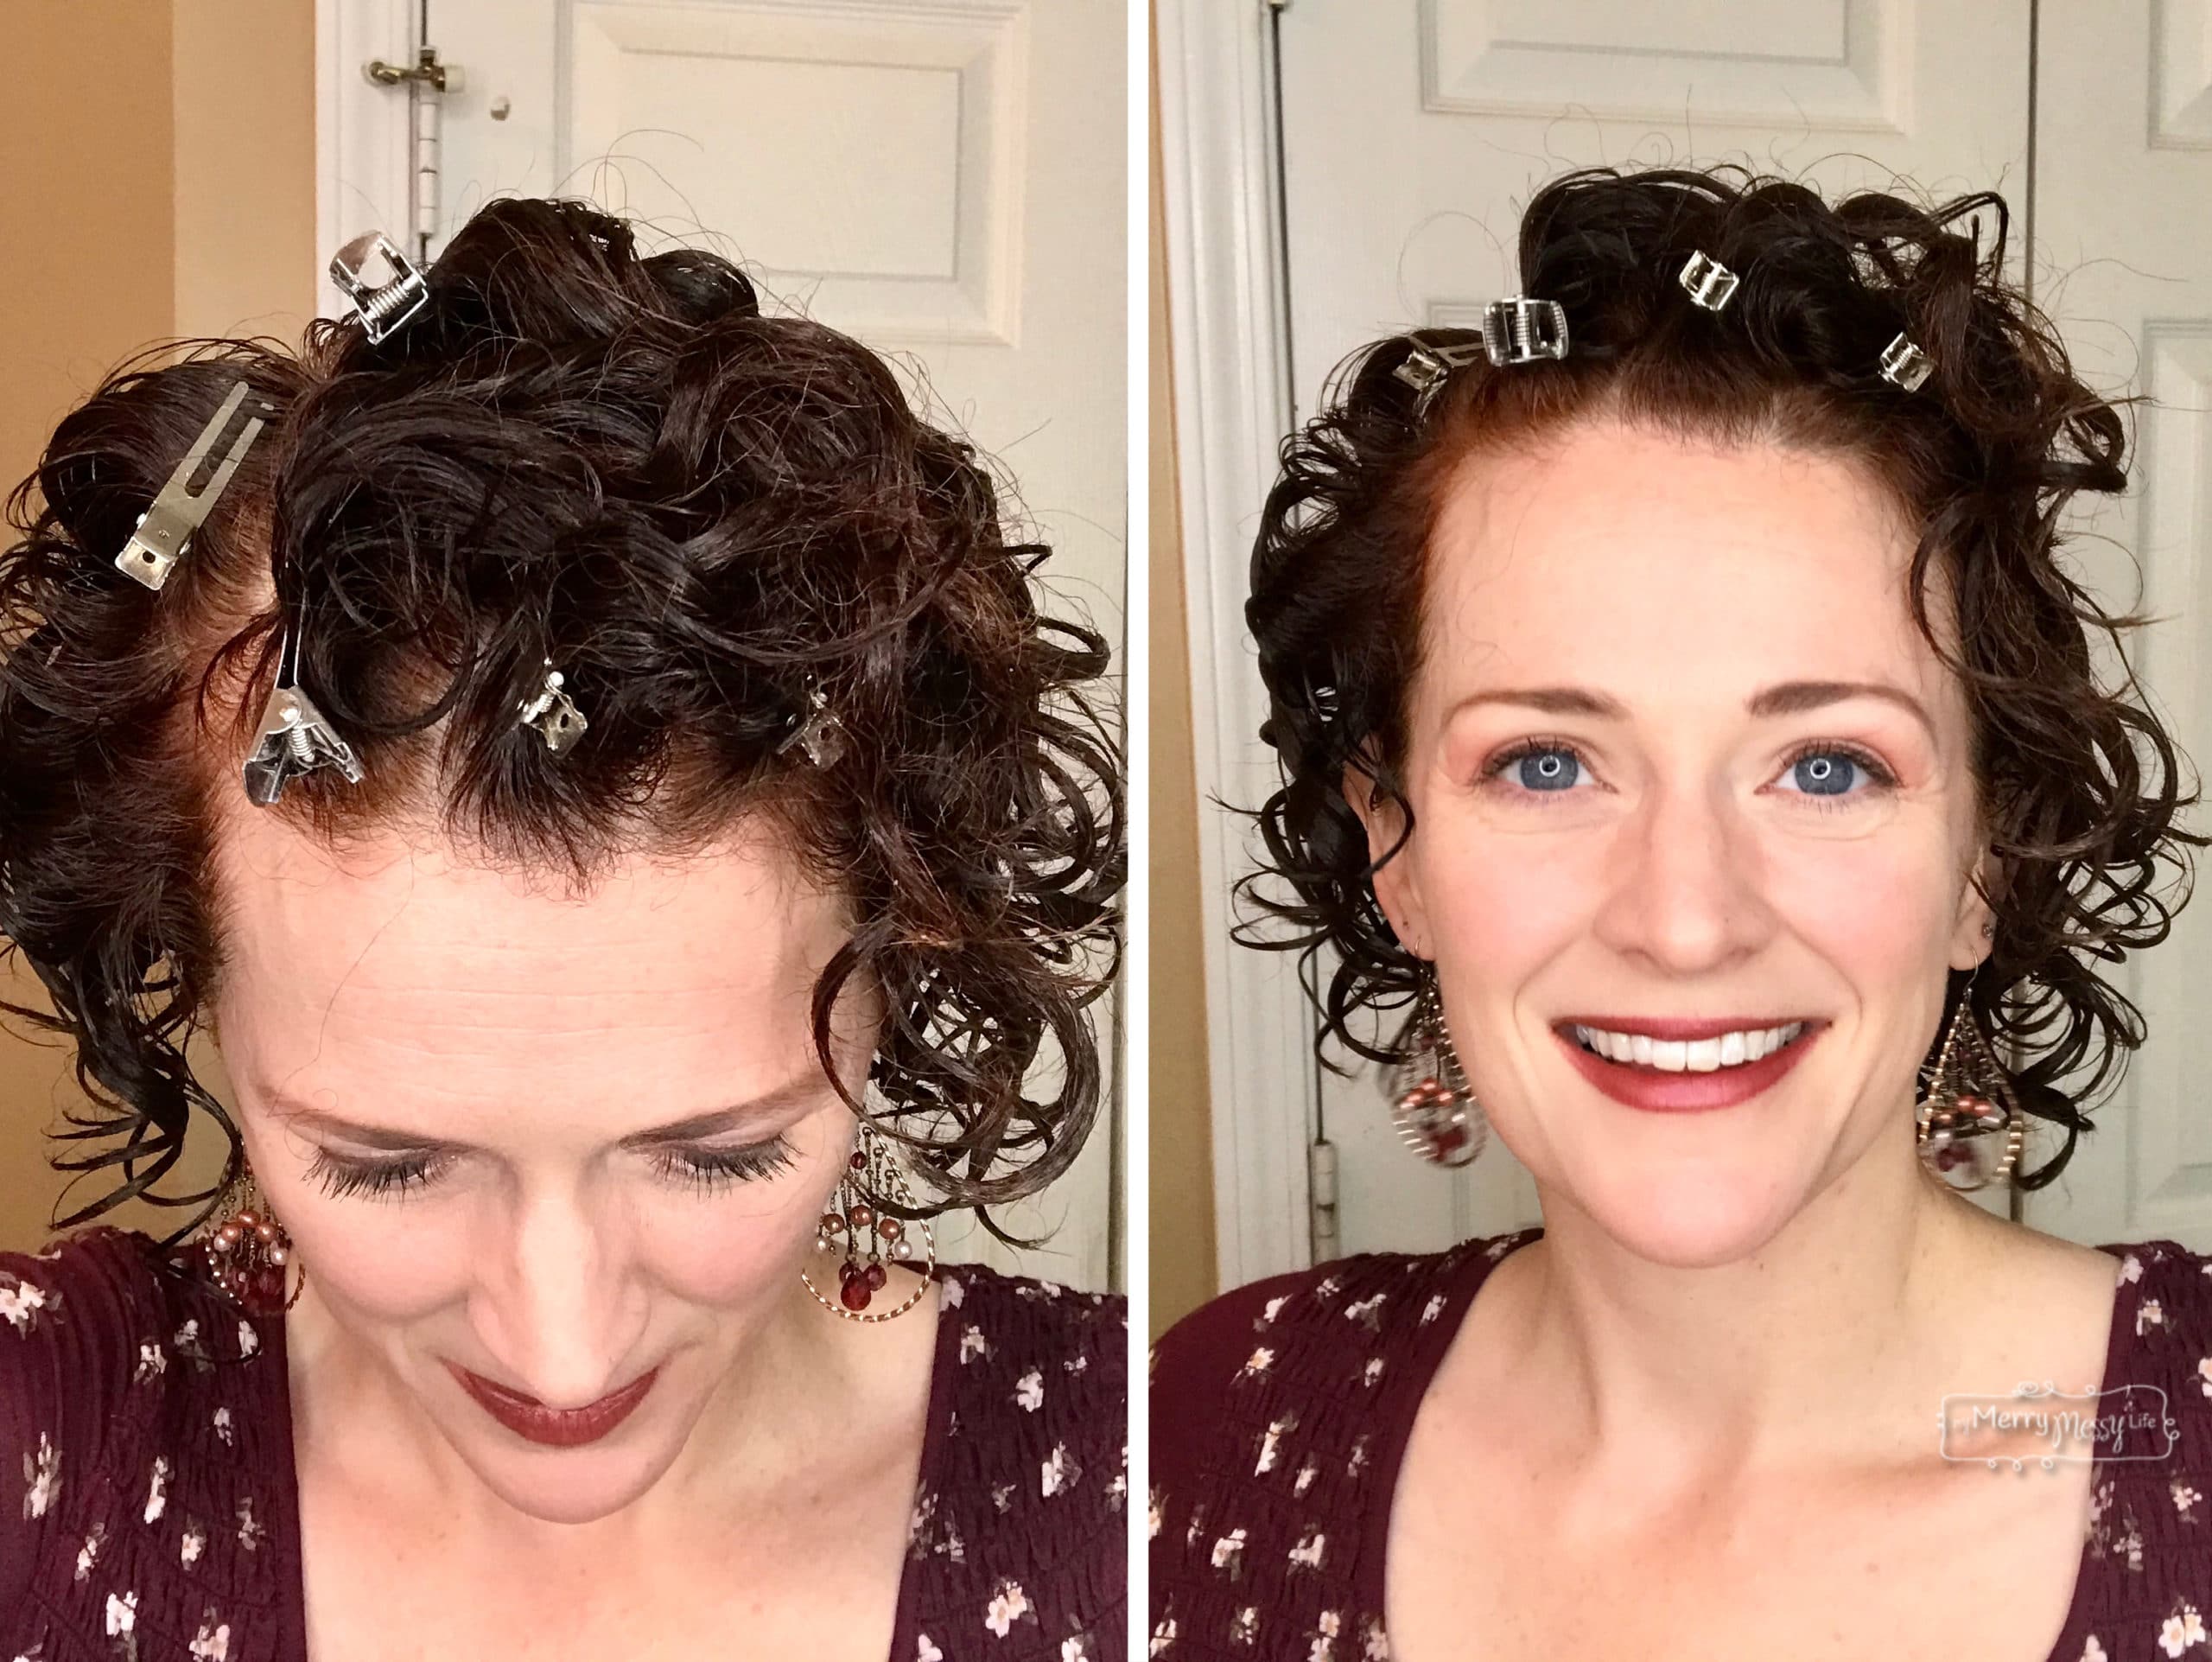 Get volume from the roots for curly hair with root clips!